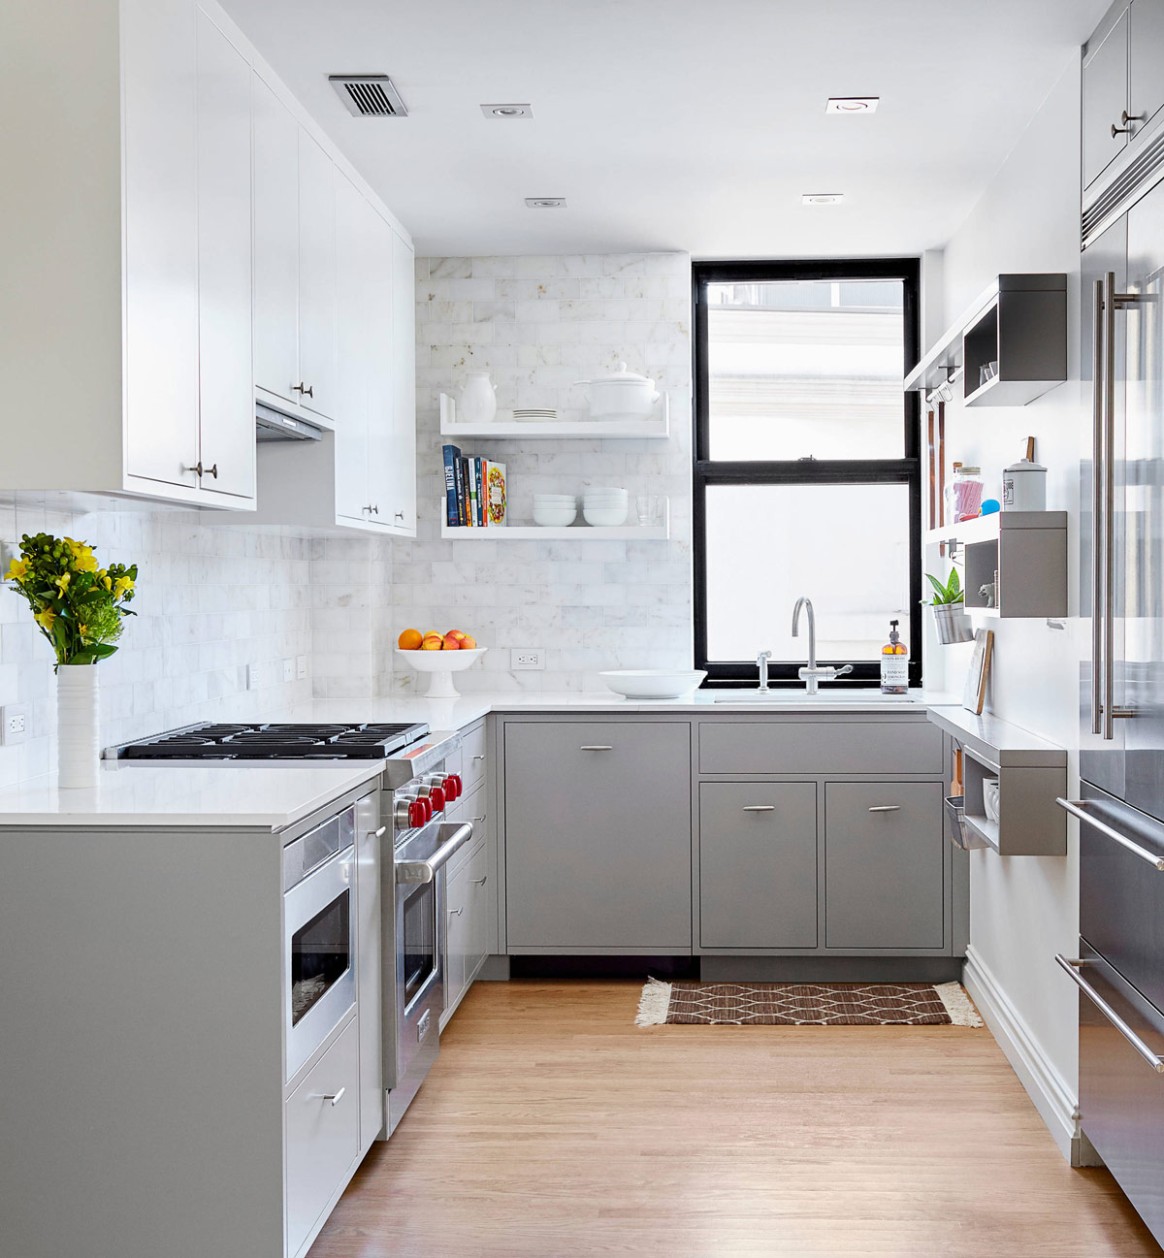 3 Gorgeous Grey and White Kitchens that Get Their Mix Right